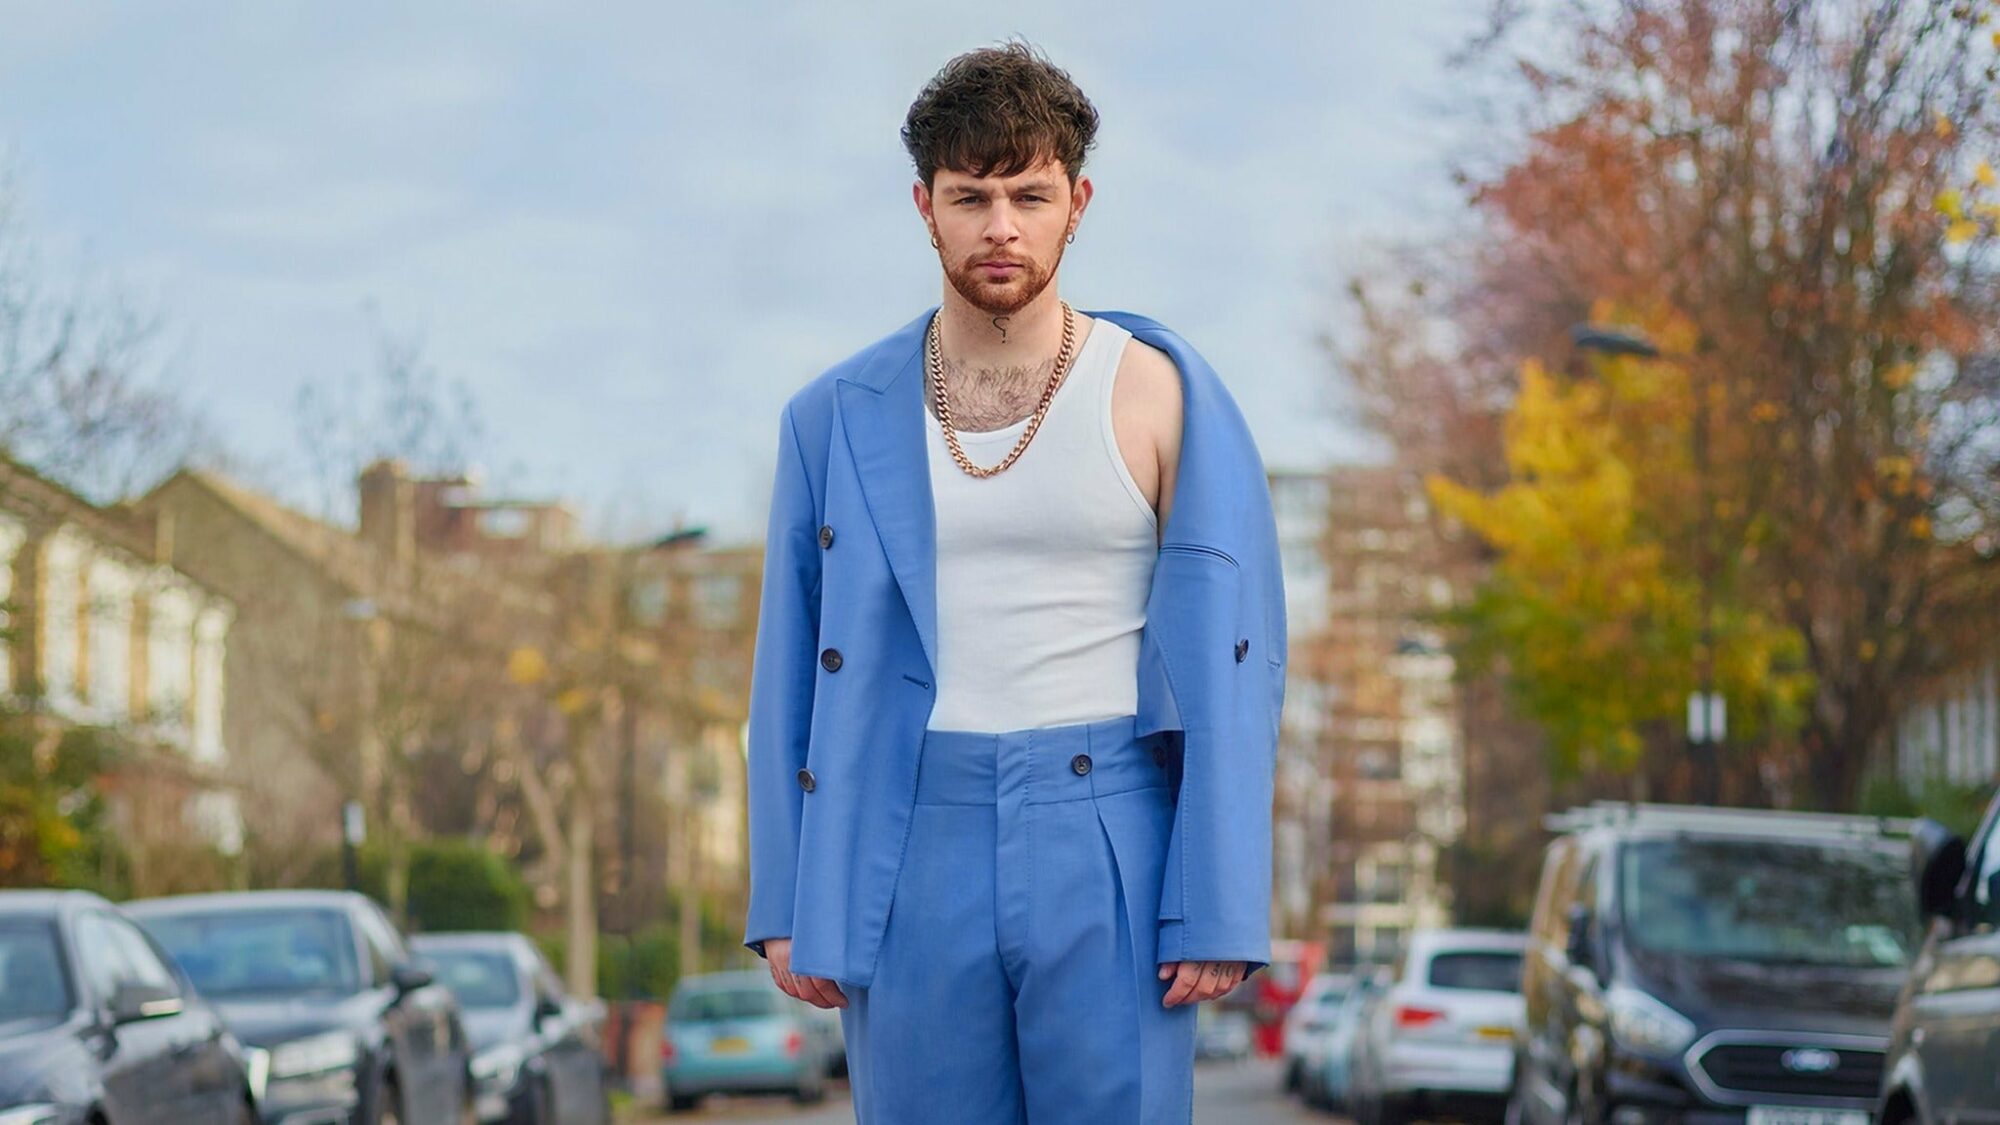 Image name Tom Grennan Official Ticket and Hotel Packages at Scarborough Open Air Theatre Scarborough the 32 image from the post Tom Grennan - Official Ticket and Hotel Packages at Scarborough Open Air Theatre, Scarborough in Yorkshire.com.